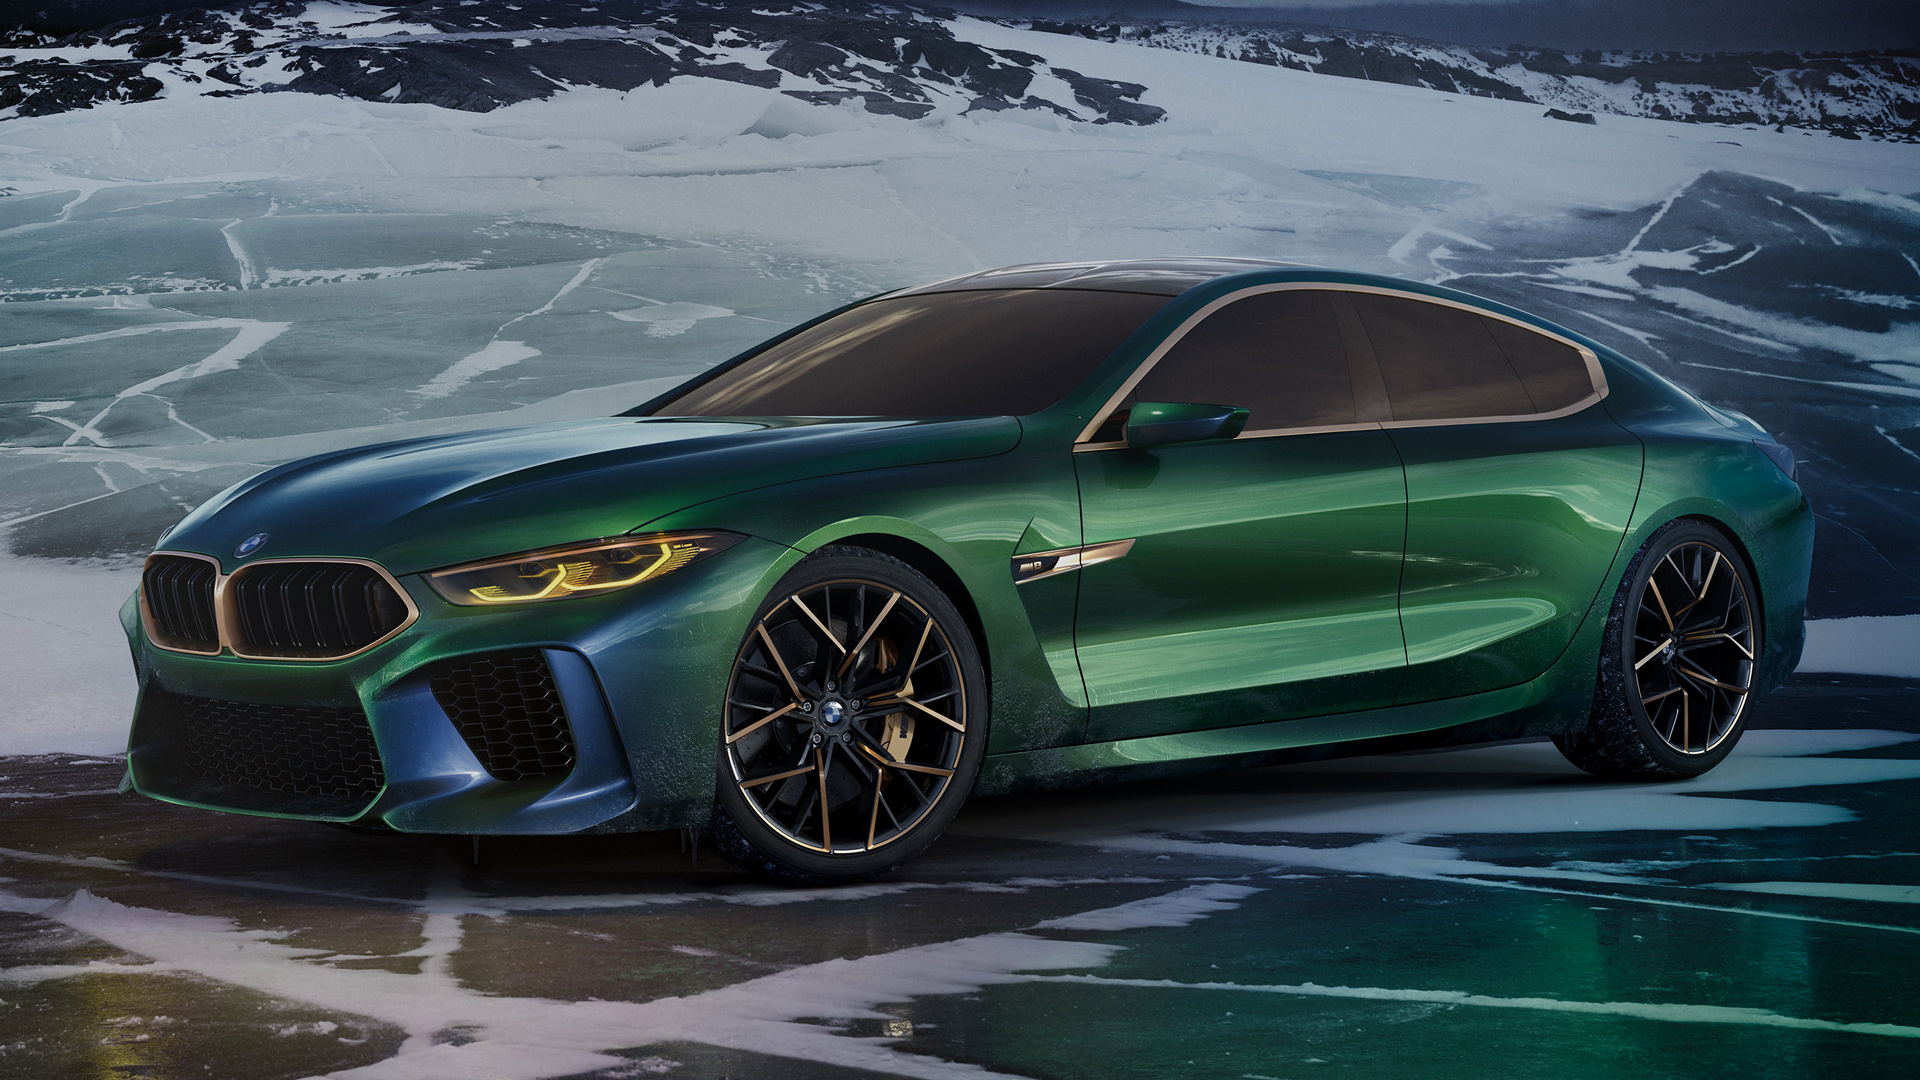 Bmw Concept M8 Gran Coupe HD Wallpaper Background Image